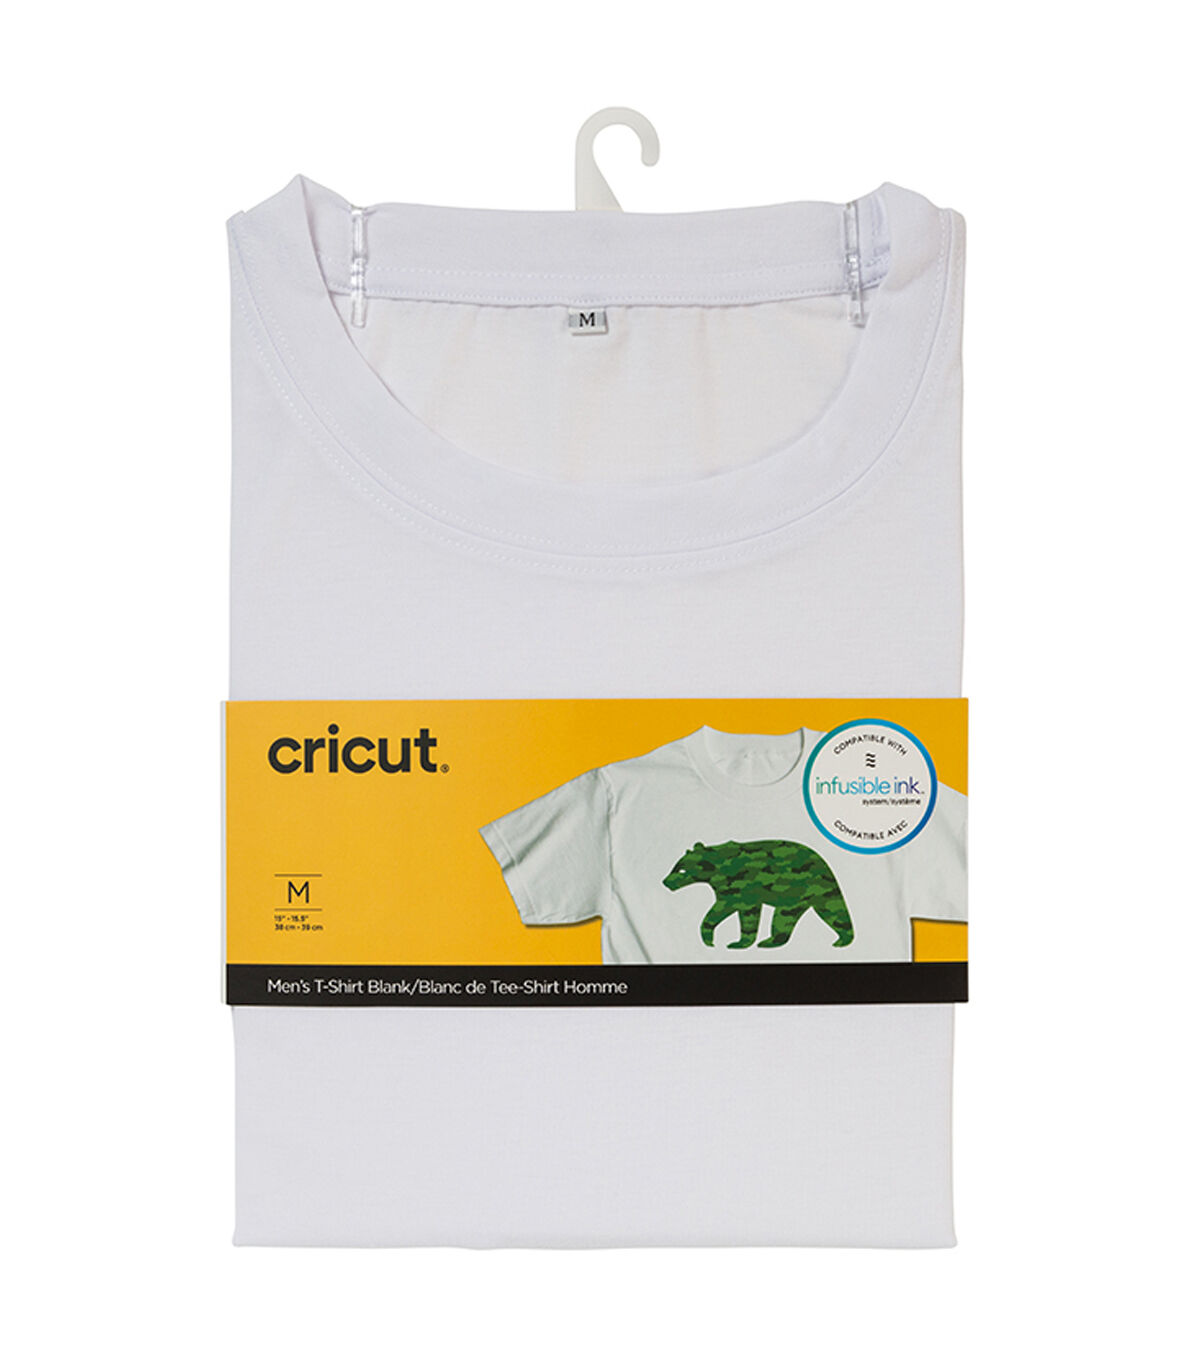 Cricut Infusible Ink Review (Not Sponsored)